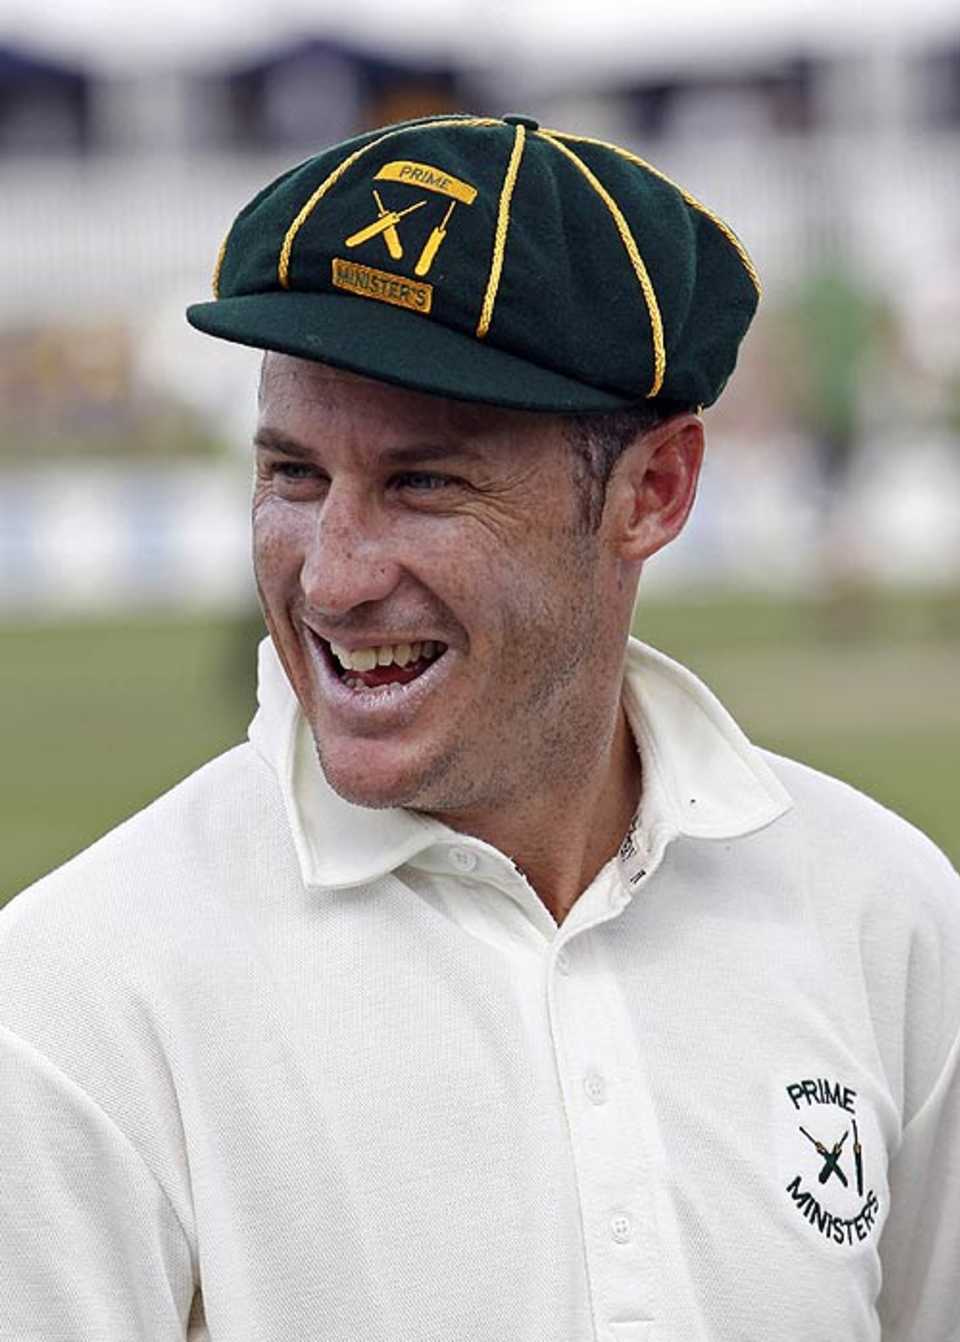 David Hussey at the Prime Minister's XI match